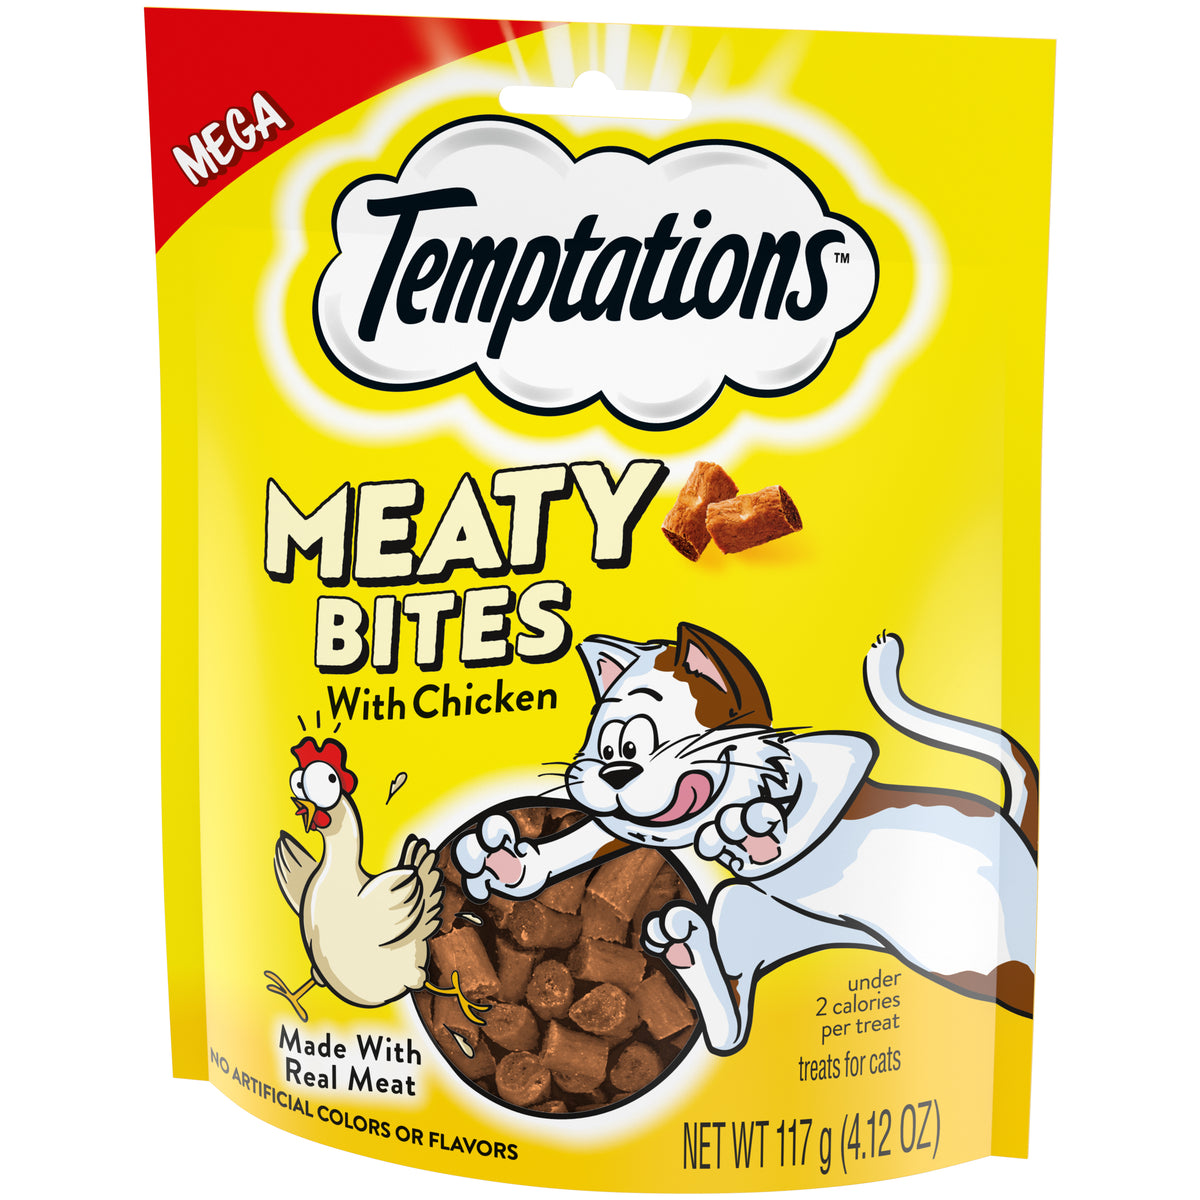 [Temptations][TEMPTATIONS Meaty Bites, Soft and Savory Cat Treats, Chicken Flavor, 4.1 oz. Pouch][Image Center Right (3/4 Angle)]